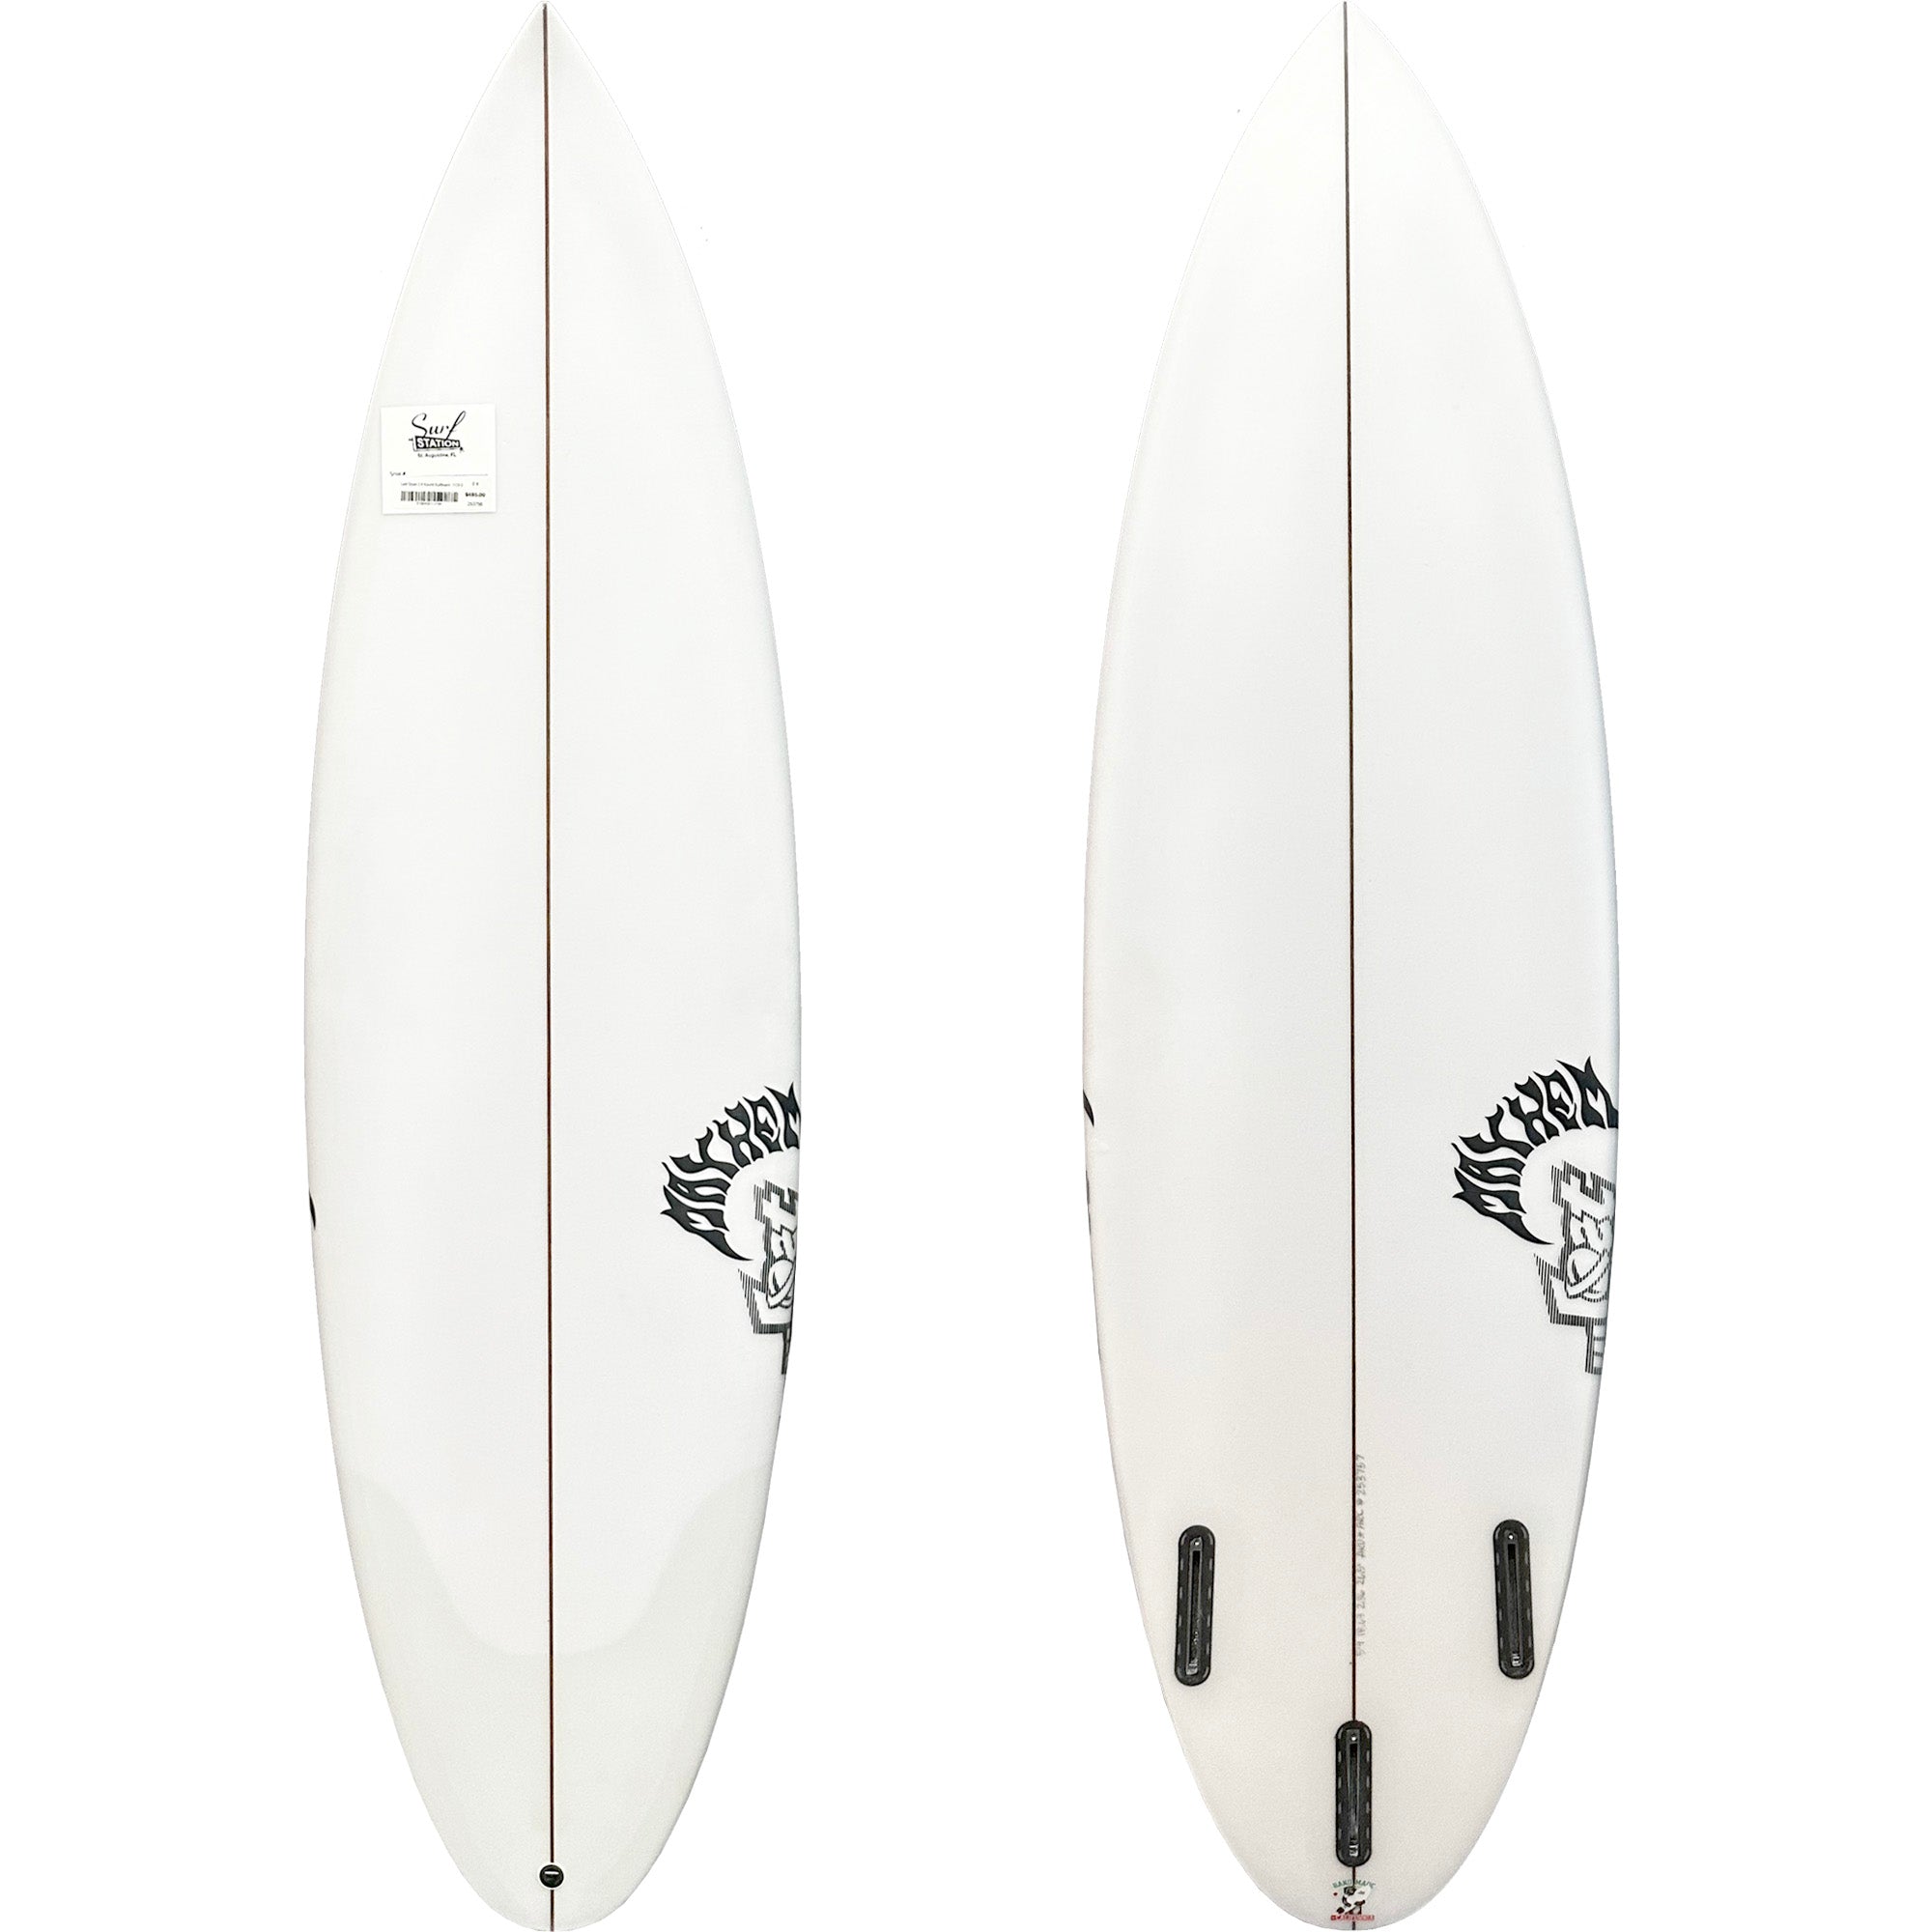 Lost Driver 3.0 Round Surfboard - Futures